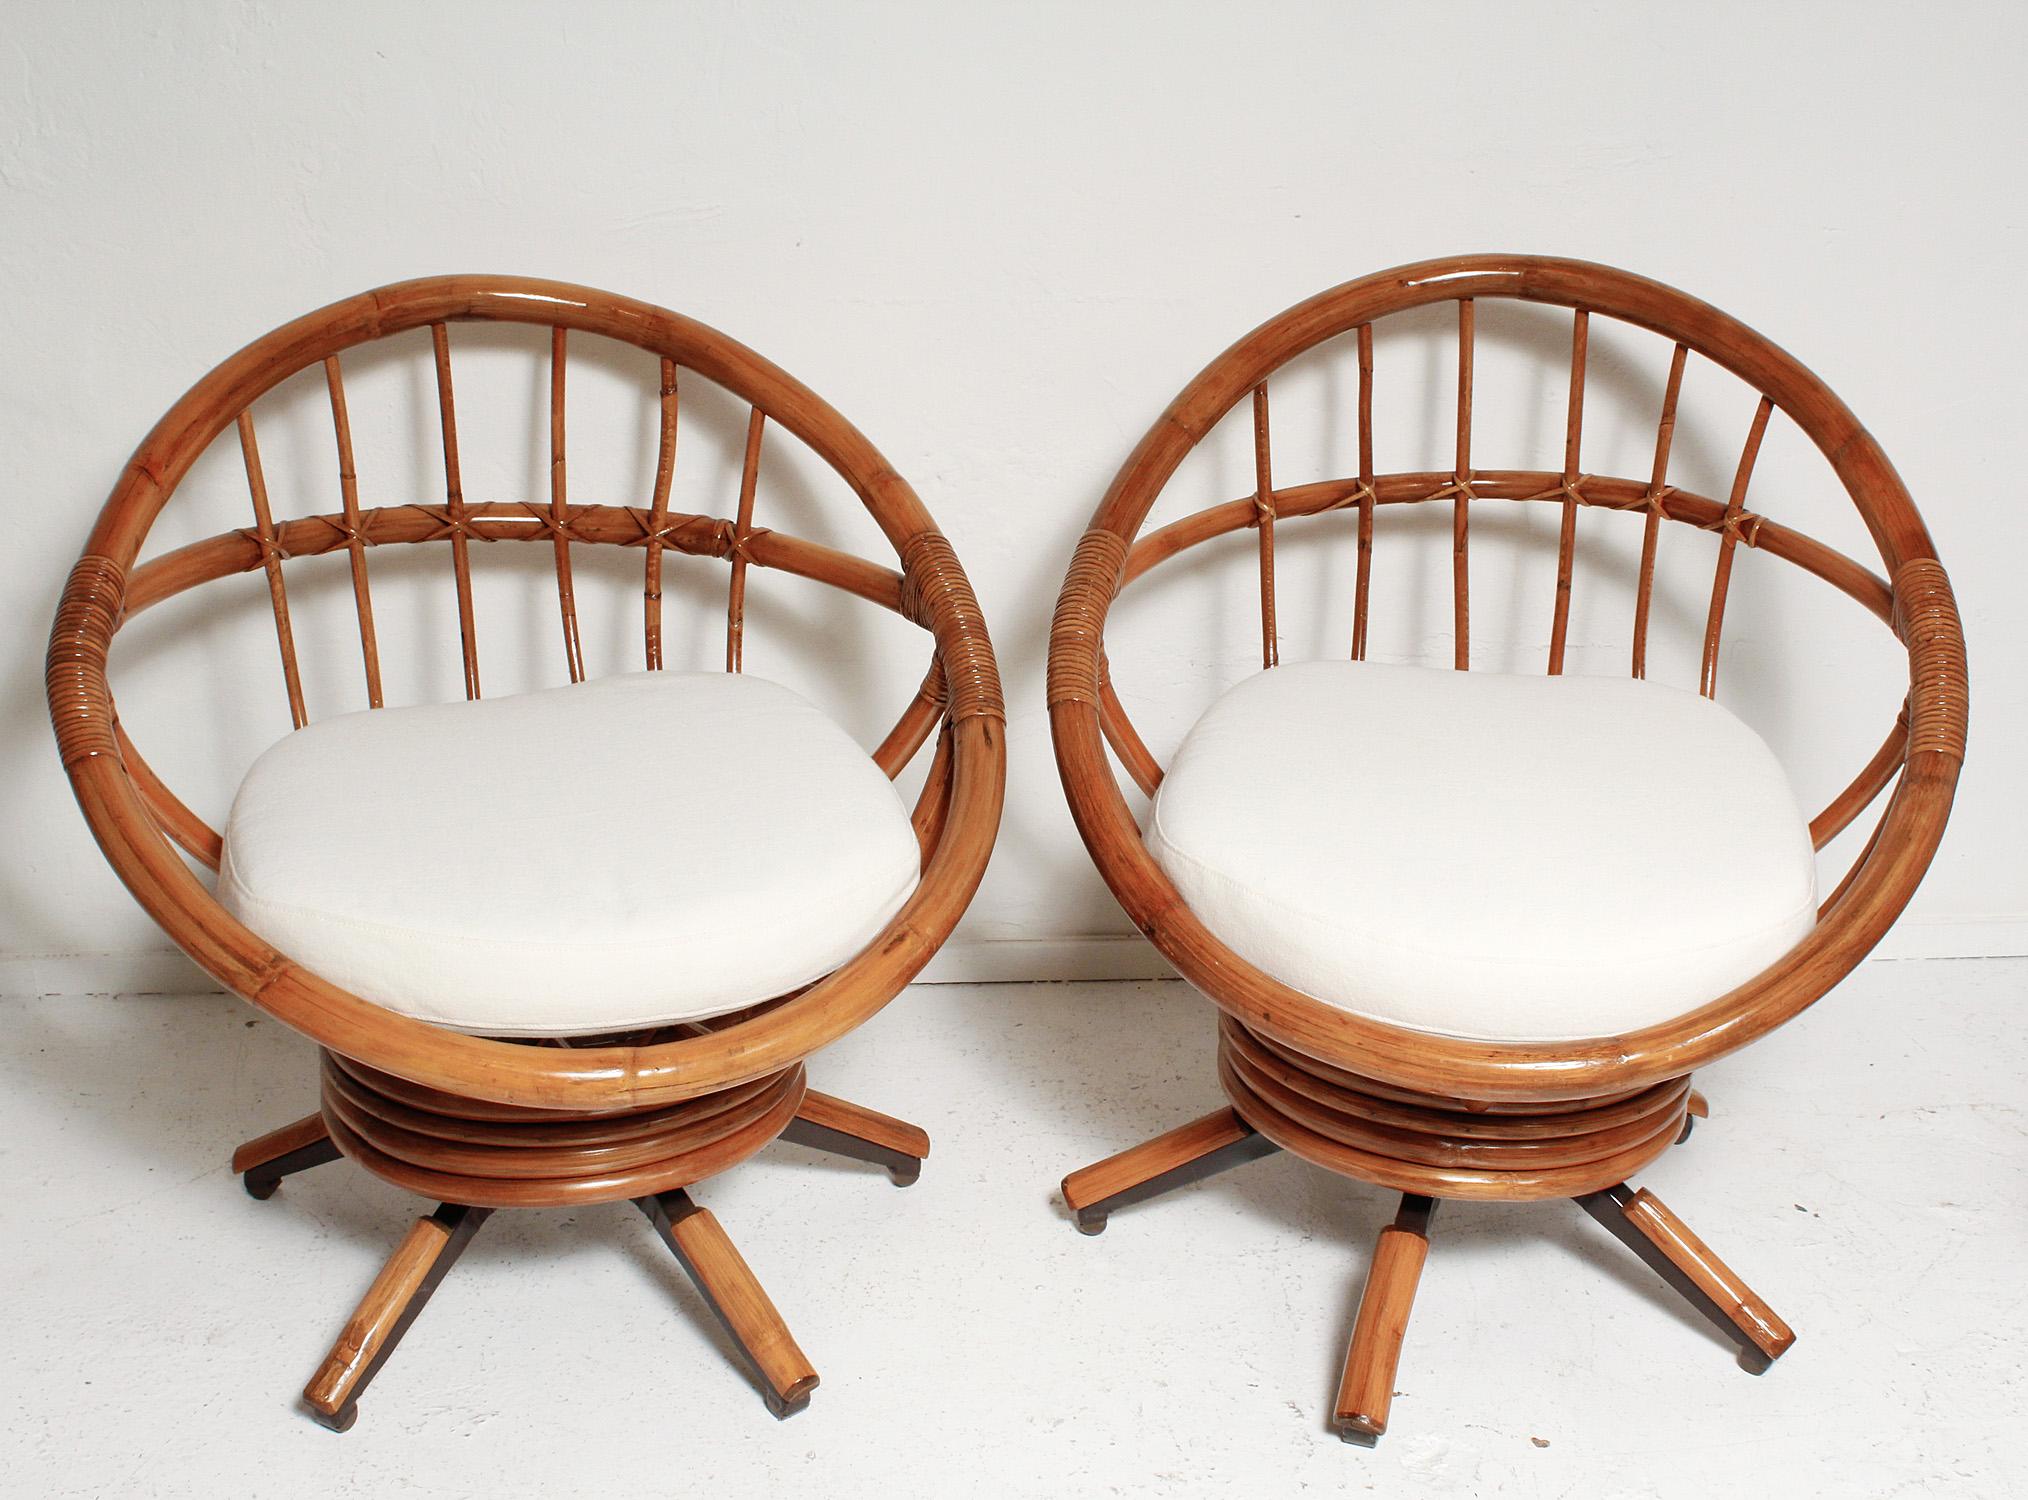 Painted Fully Restored Pair of Bamboo Swivel Chairs, American, circa 1960